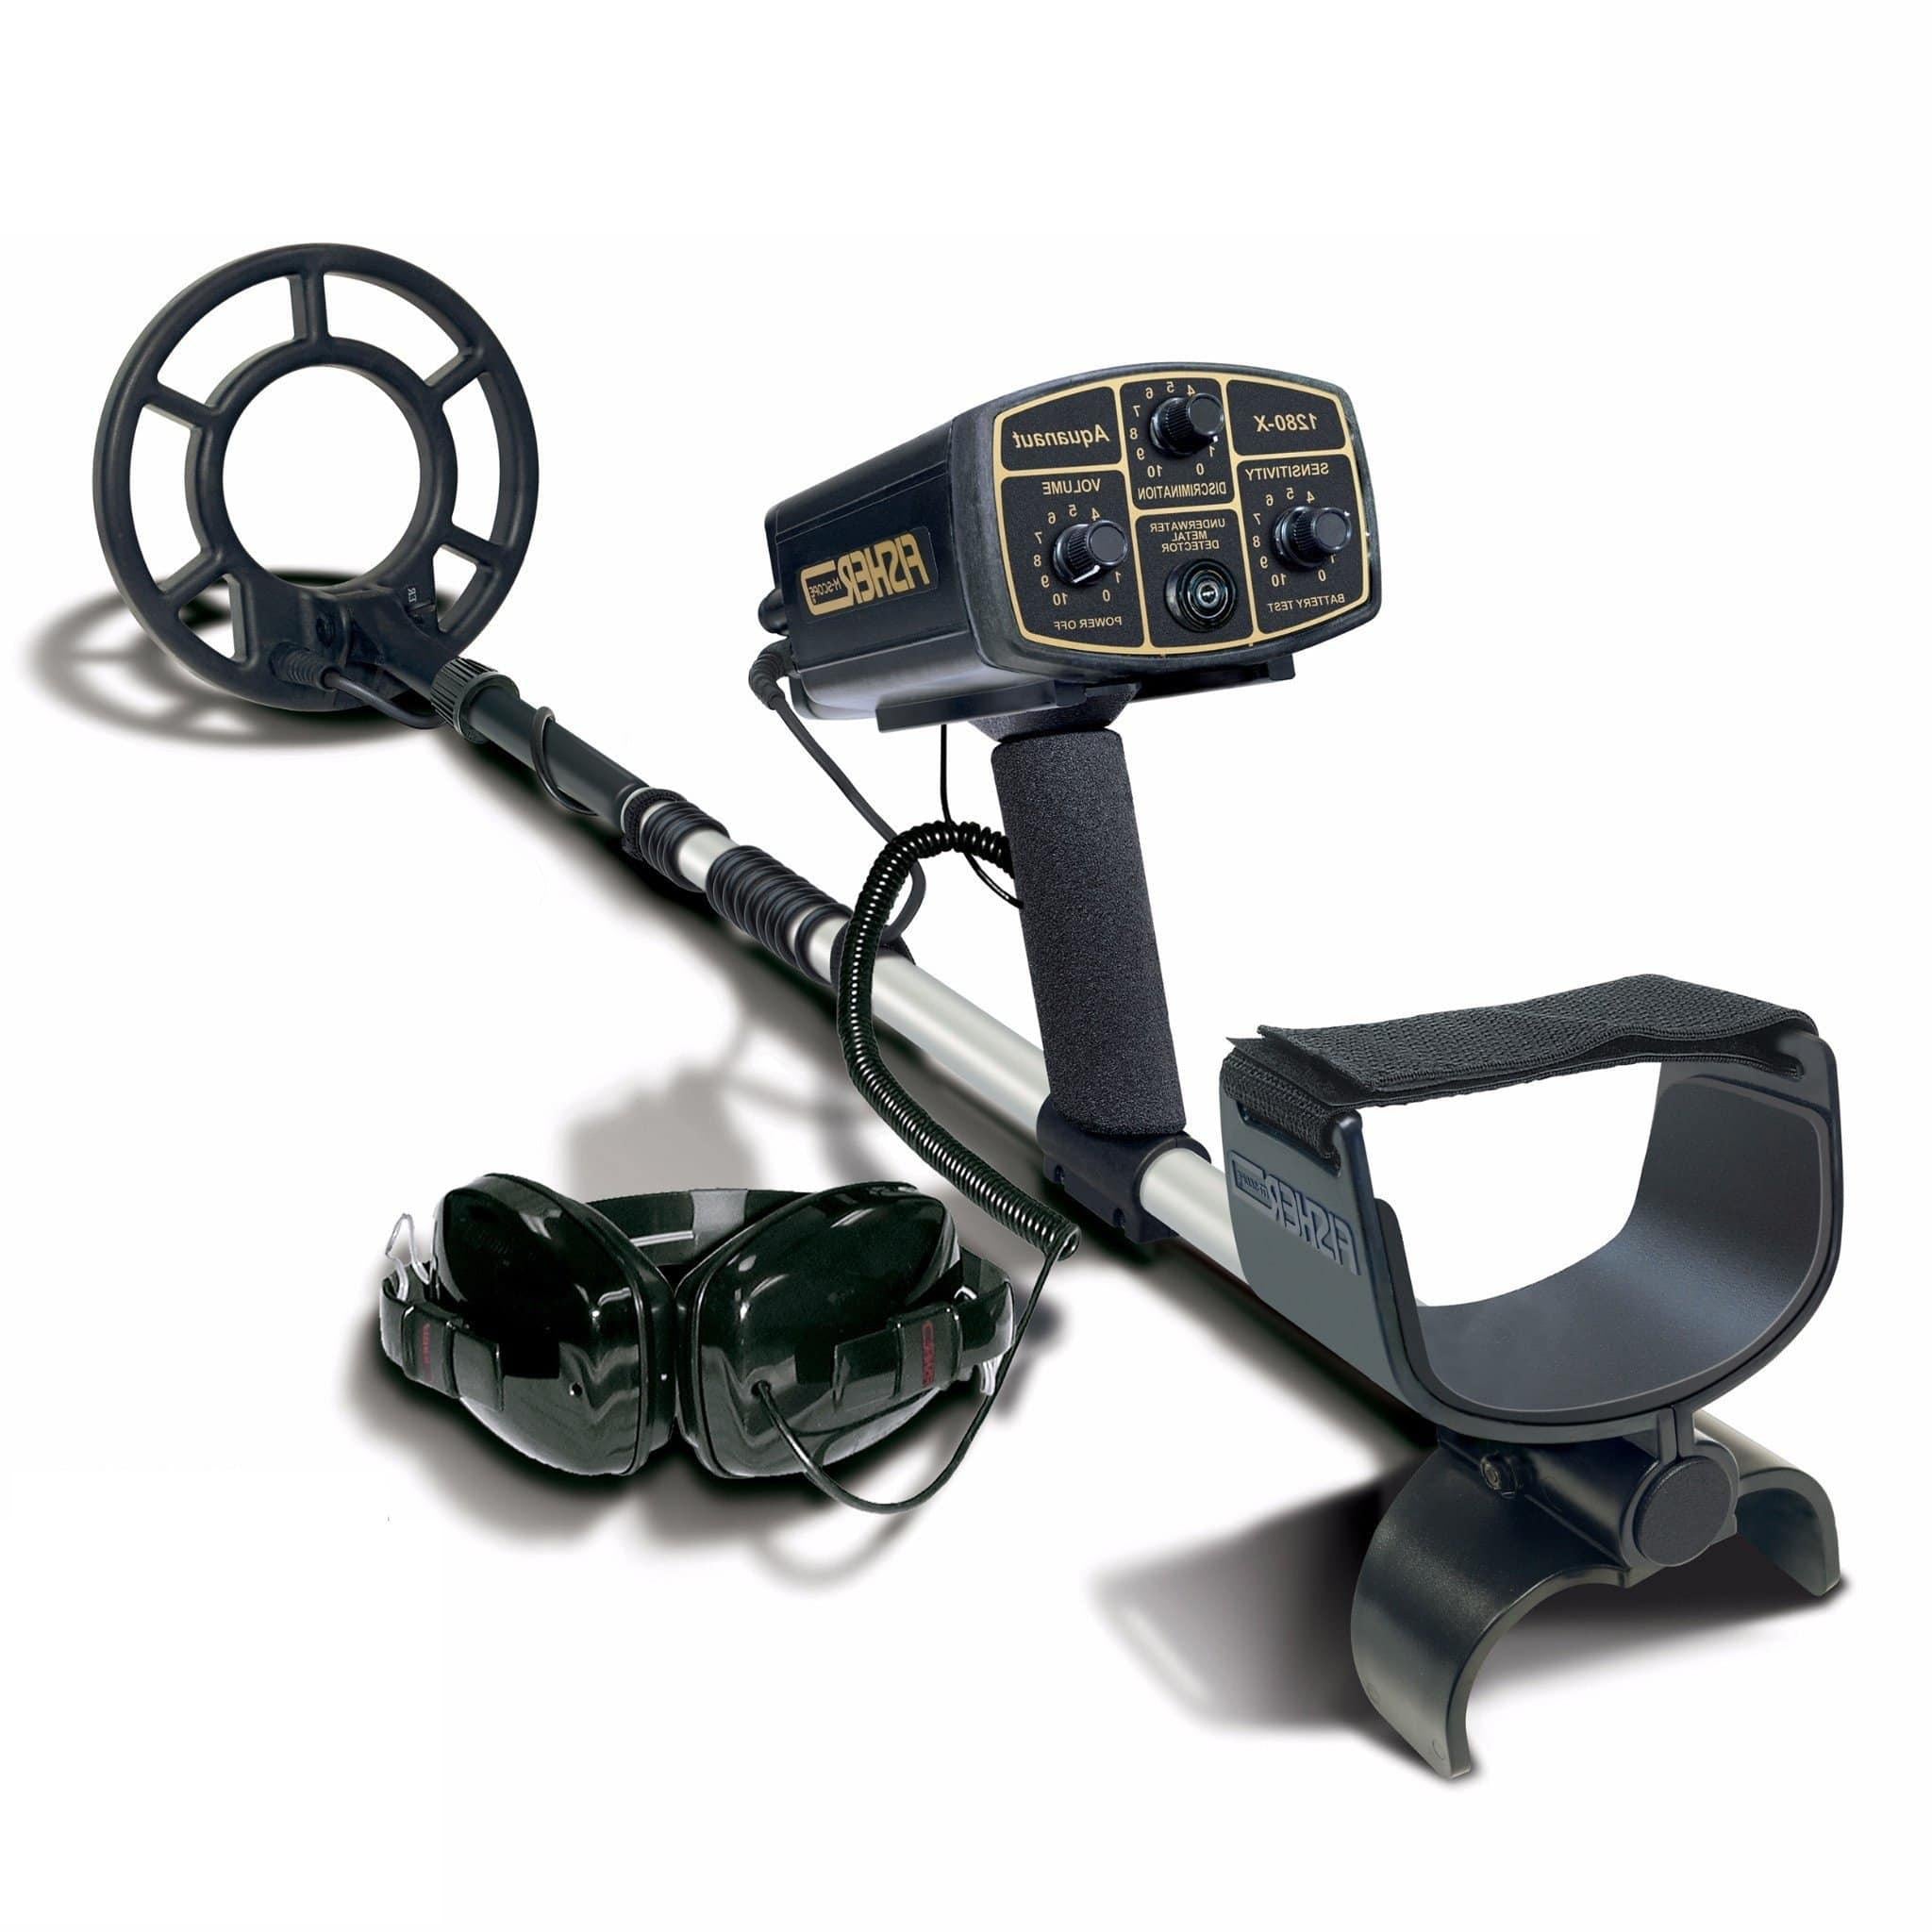 Fisher 1280X Underwater Metal Detector with 8″ Search Coil and a 2 Year Warranty